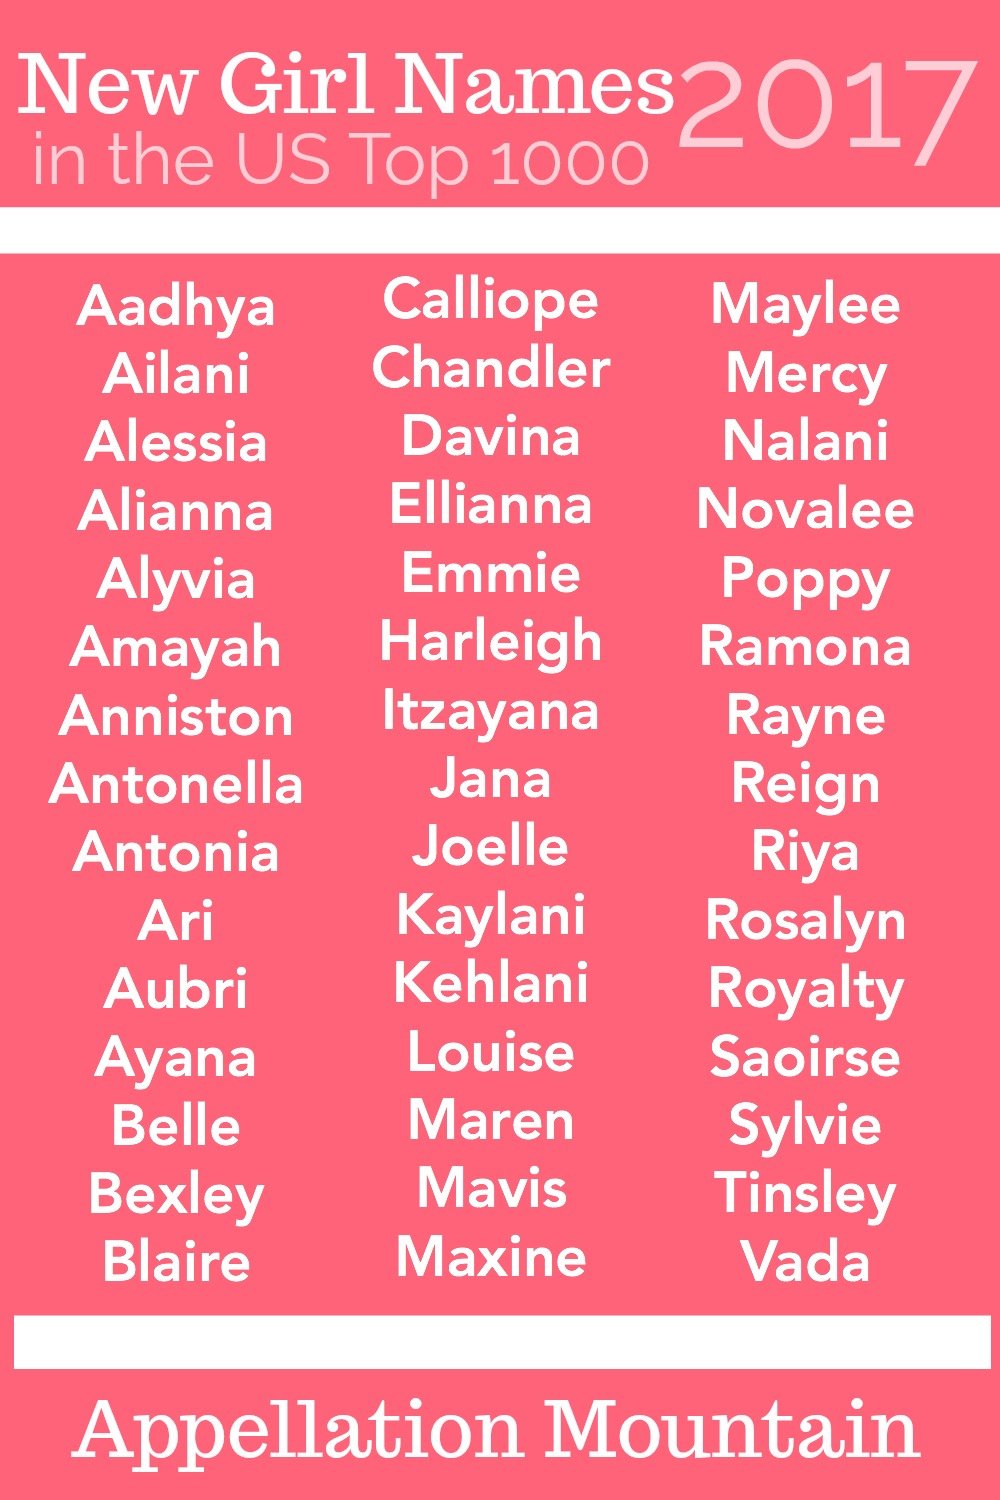 new-girl-names-2017-novalee-mercy-and-sylvie-appellation-mountain